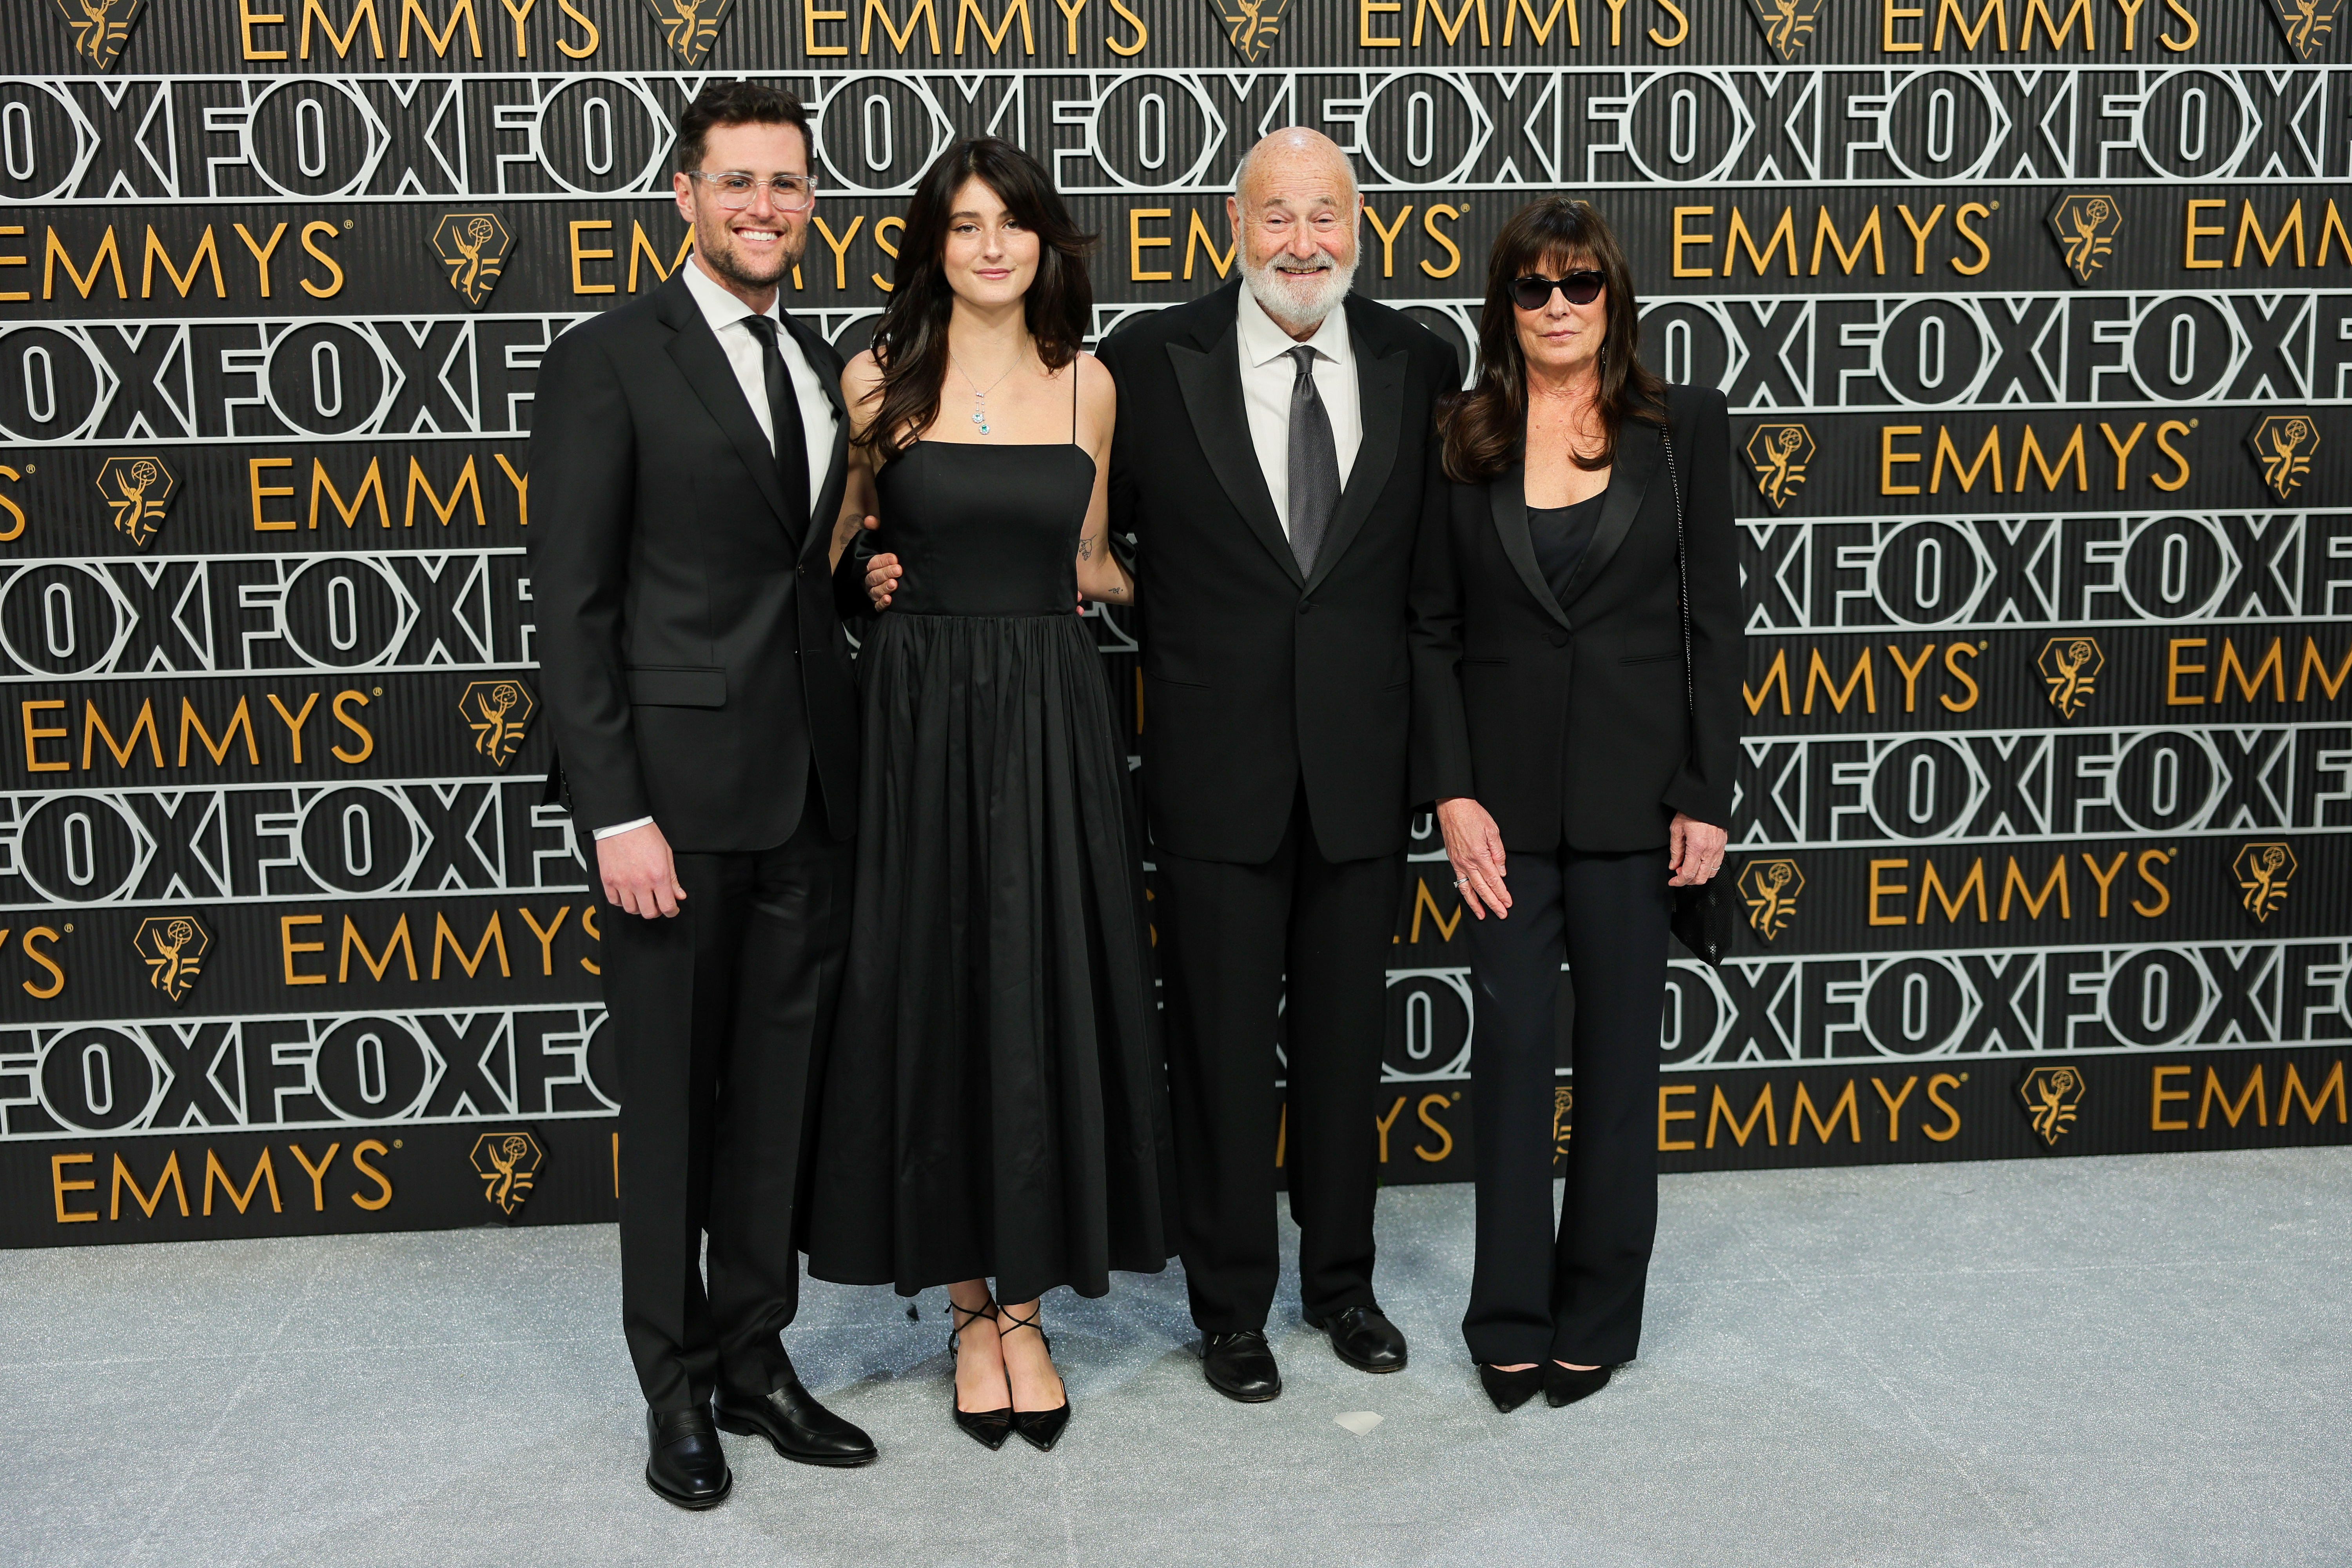 Jake Reiner, Romy Reiner, Rob Reiner, and Michele Singer at the 75th annual Emmy Awards | Source: Getty Images